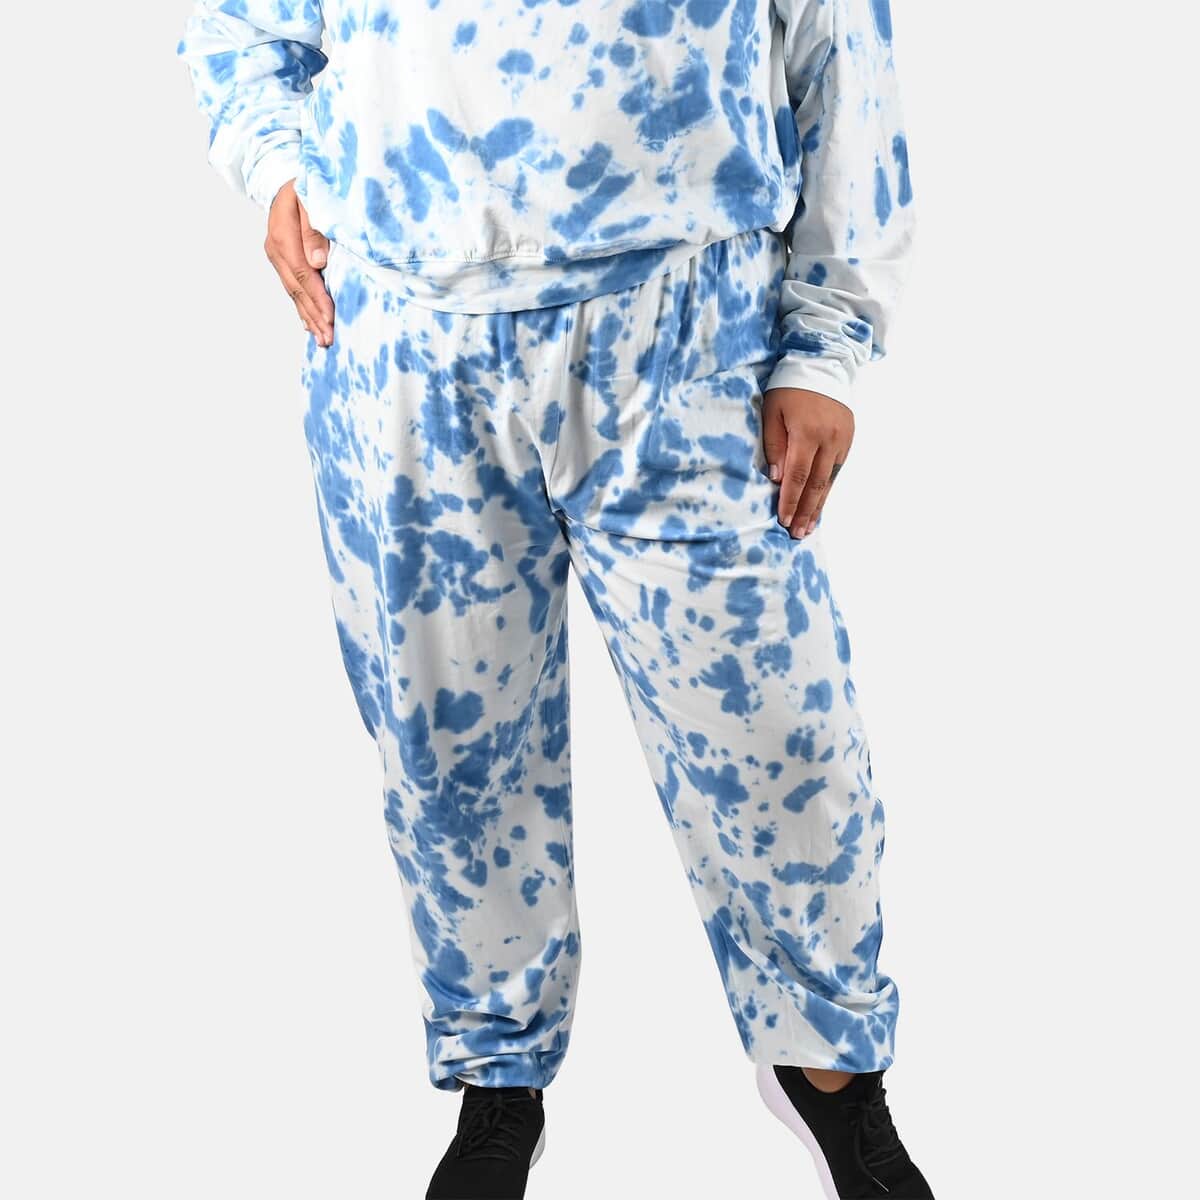 Tamsy Blueberry Tie Dye Fleece Lounge Pant - S image number 5